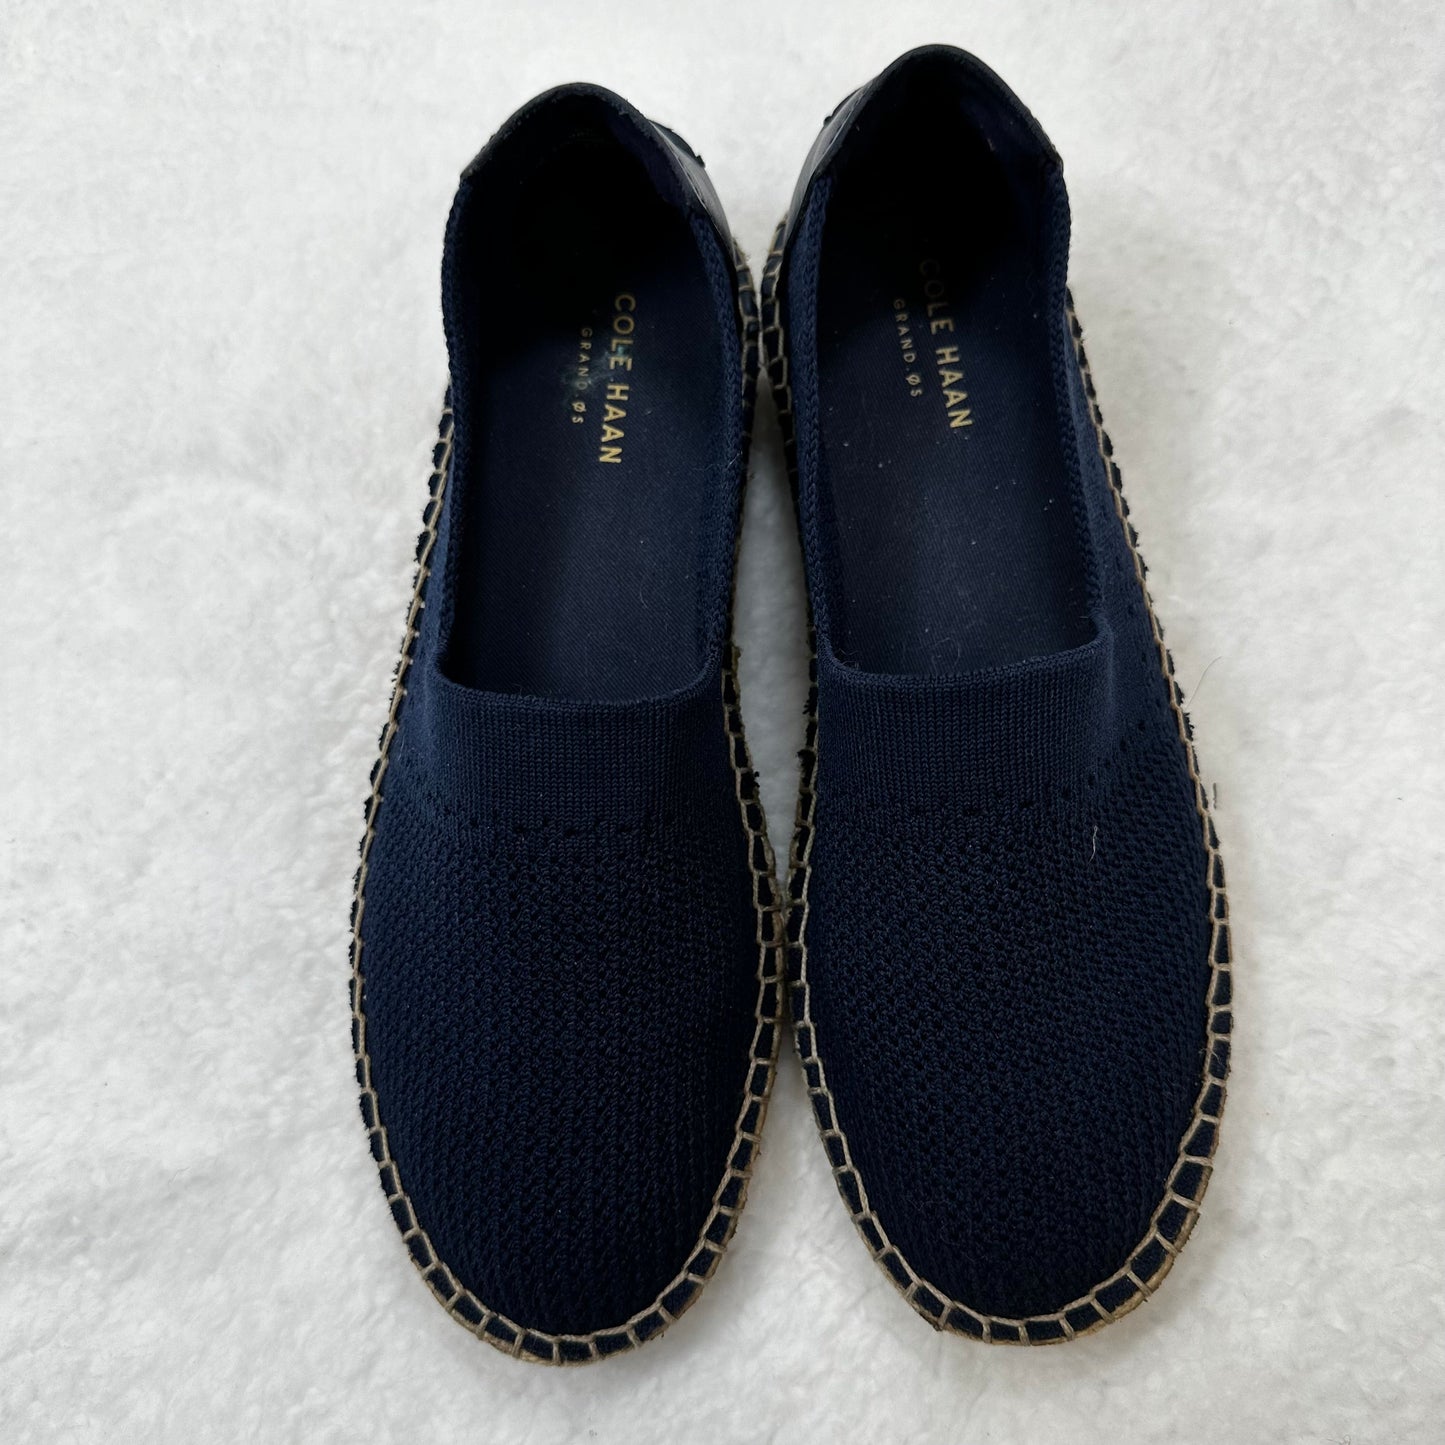 Navy Shoes Flats Ballet Cole-haan O, Size 7.5